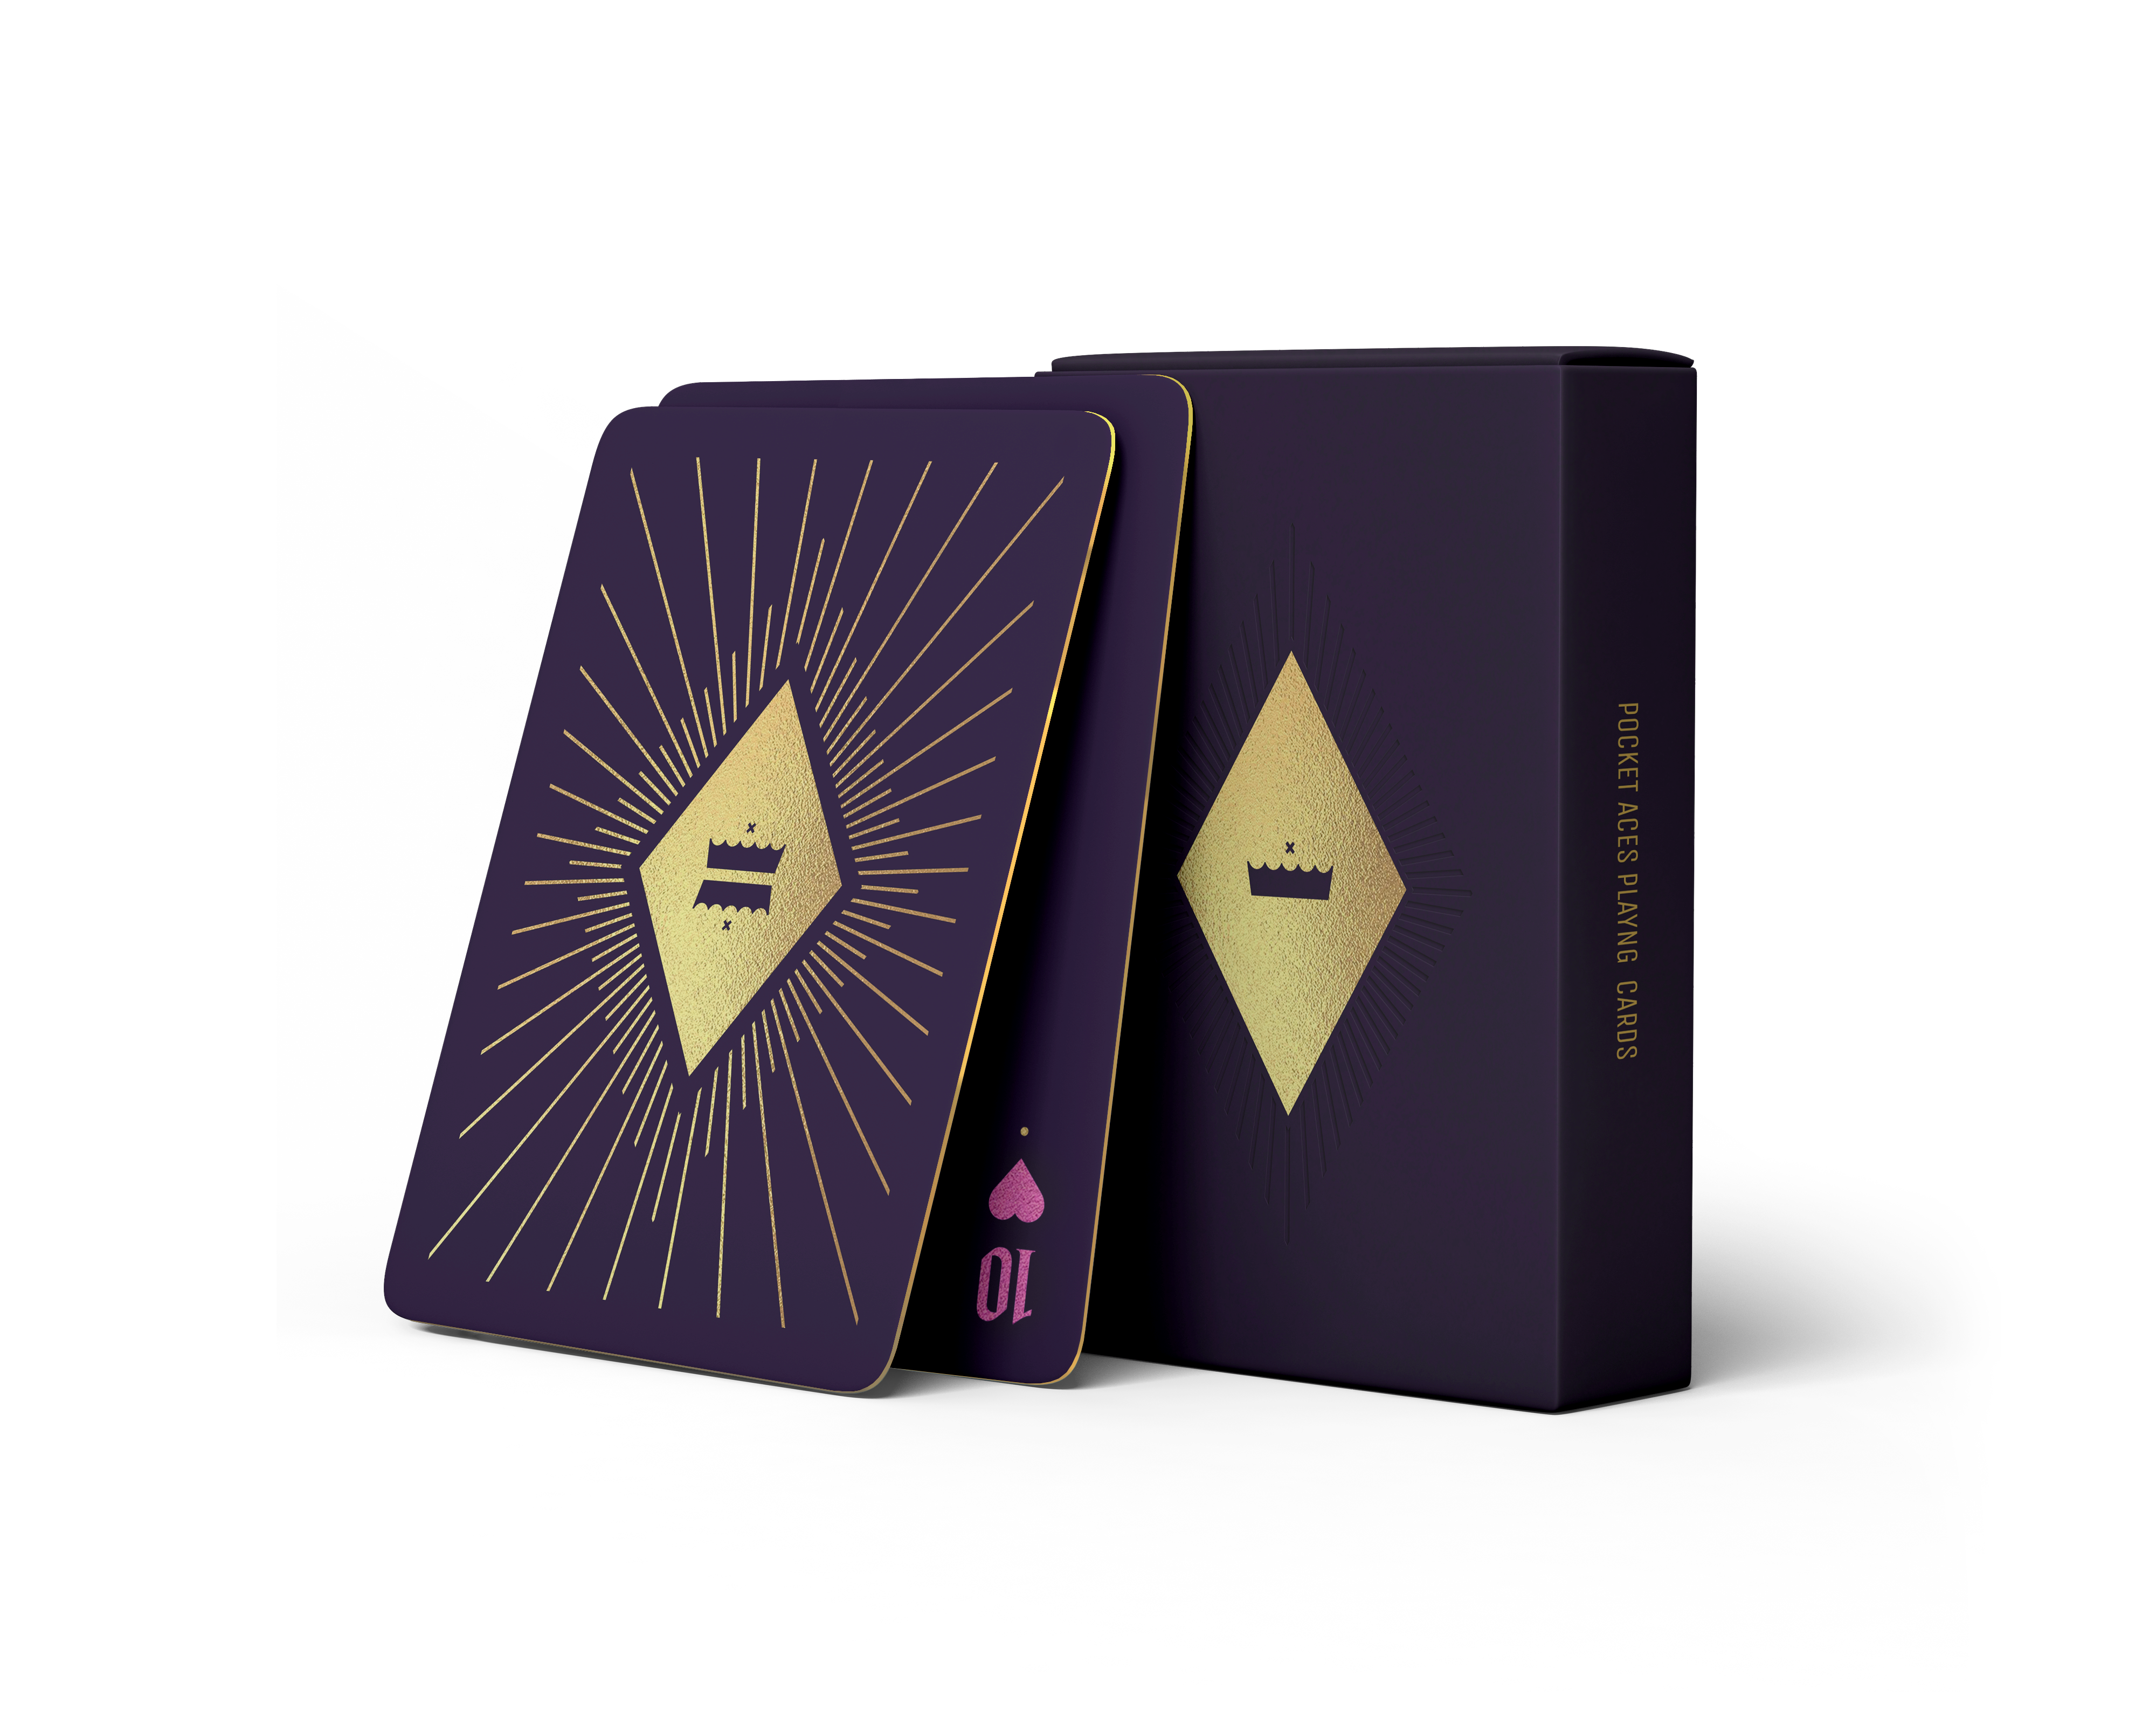 A purple deck of playing cards featuring dual crowns on the card back.